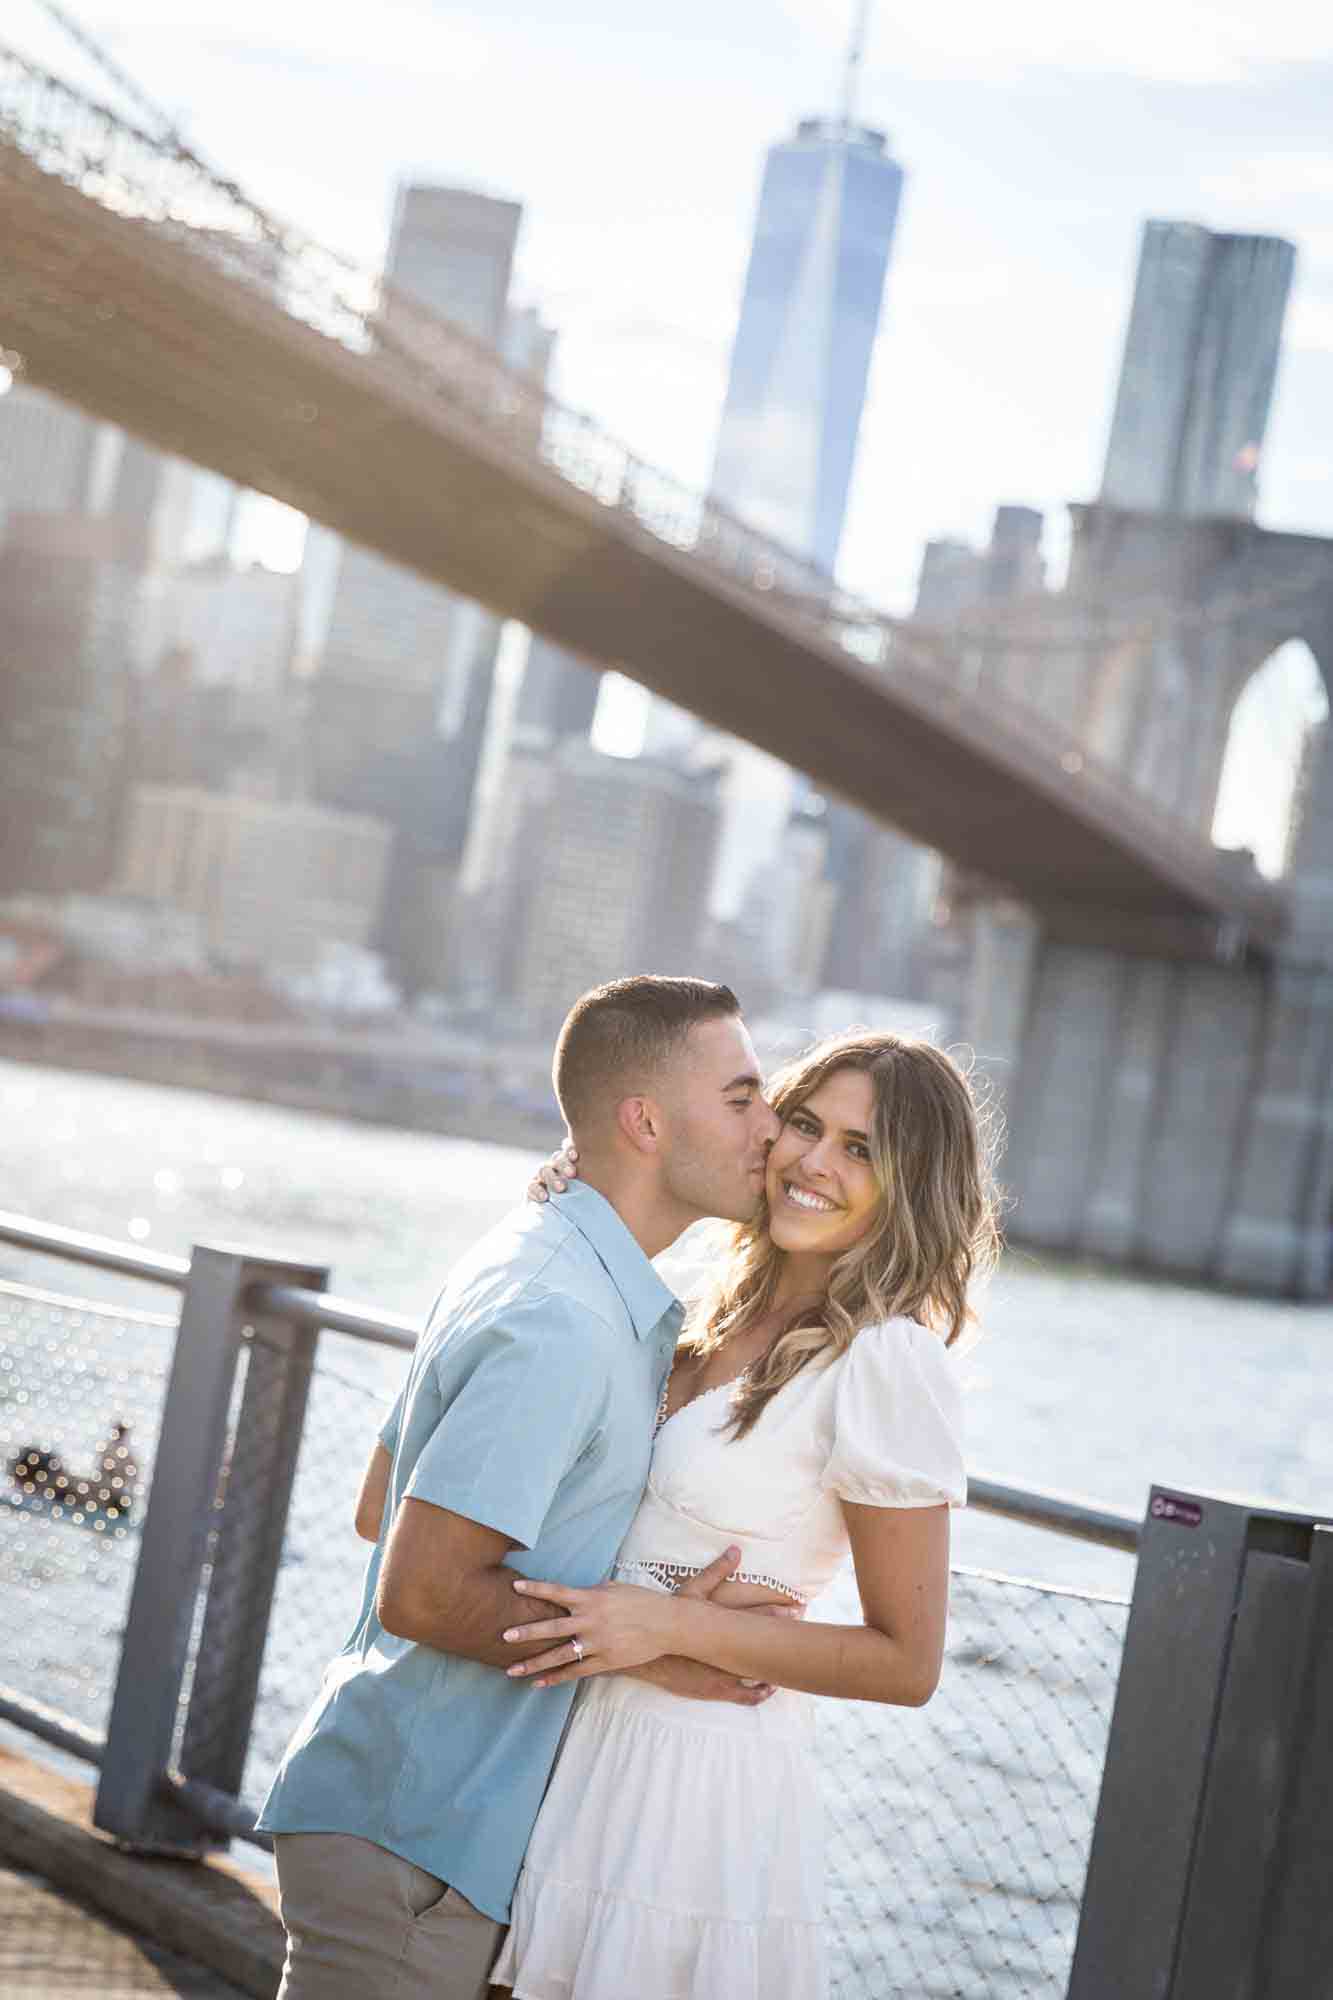 Man kissing woman on the cheek in front of Brooklyn Bridge during a surprise proposal in Brooklyn Bridge Park